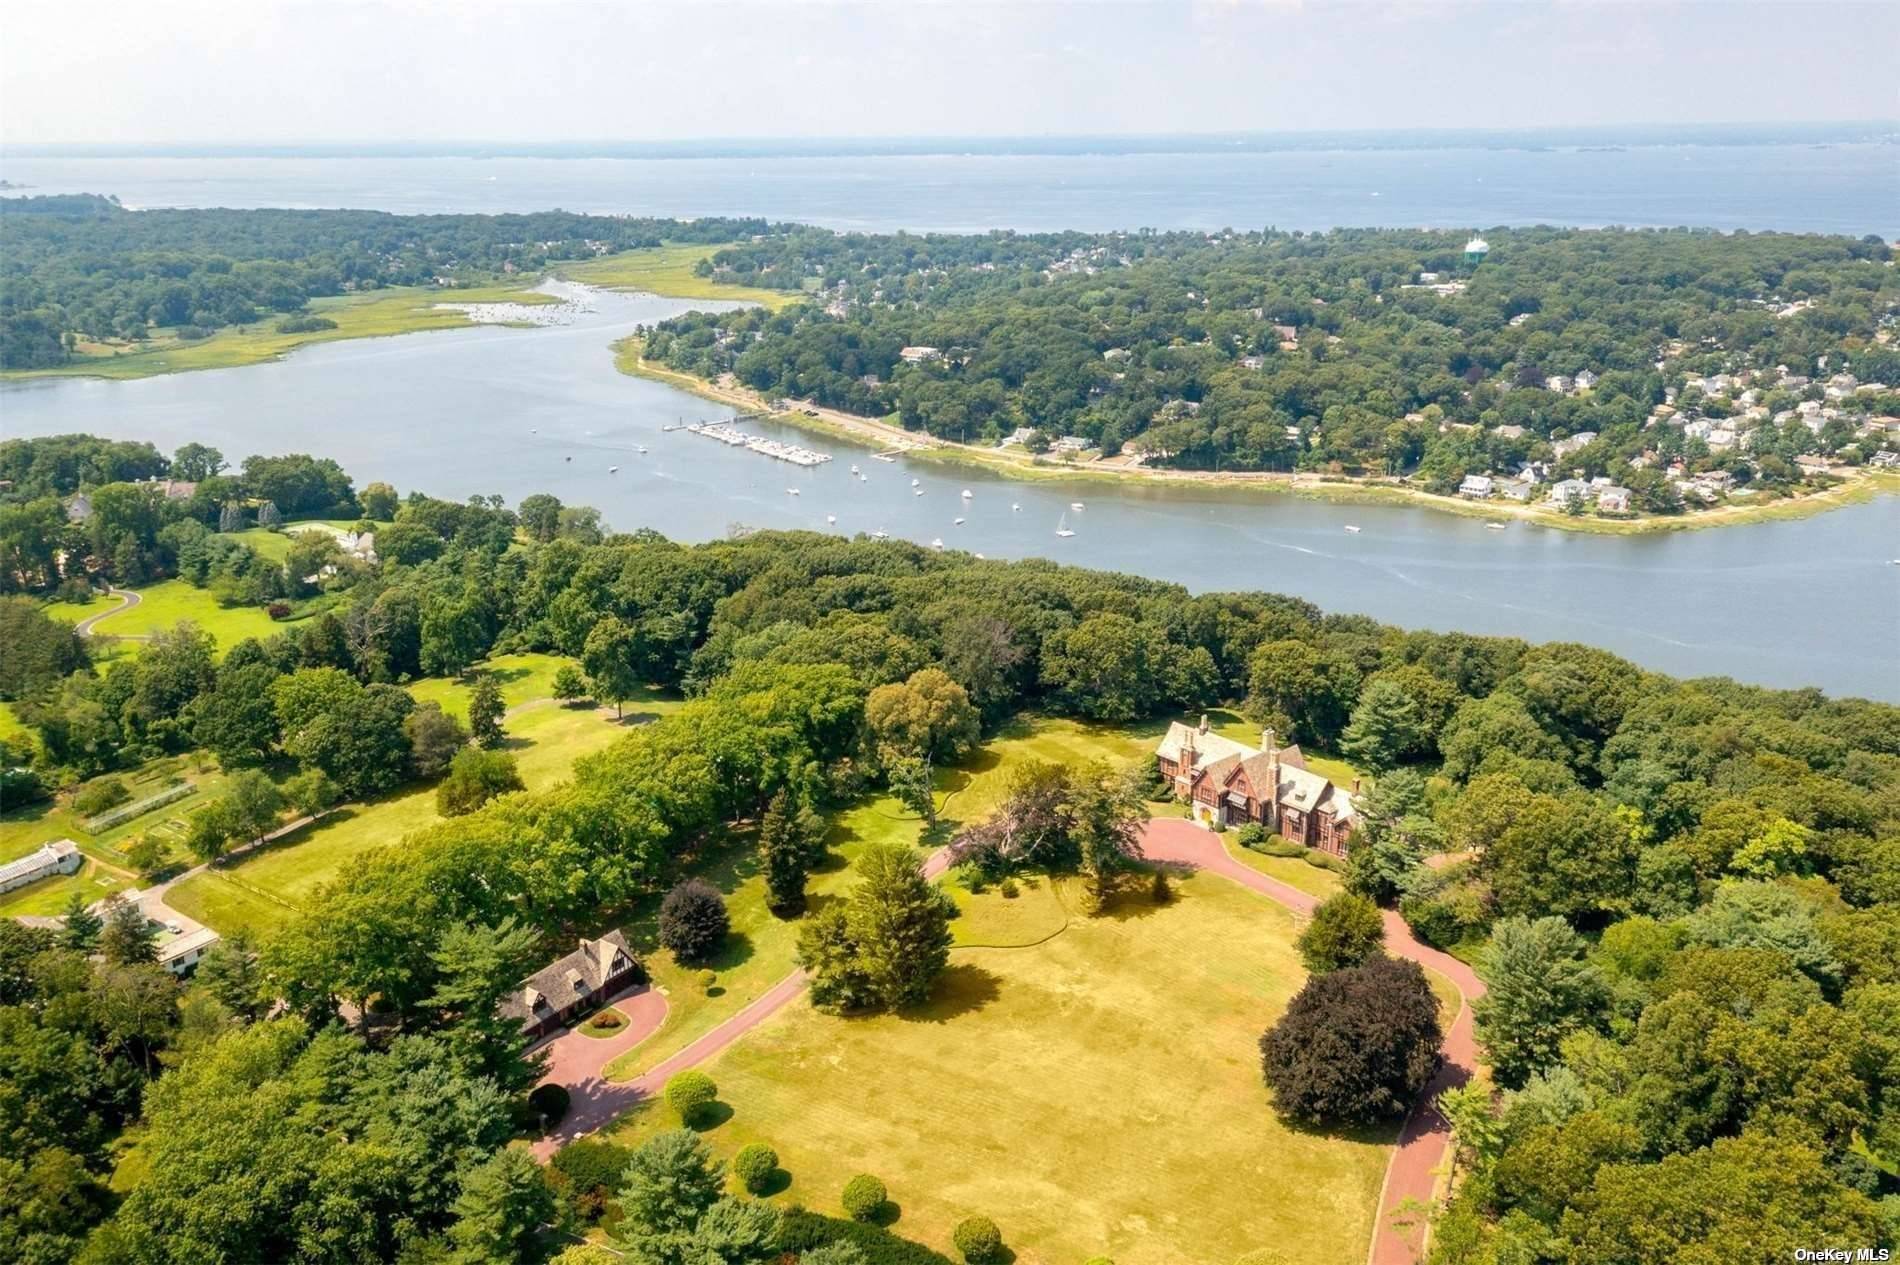 A 12 Acres of Waterfront Land with Multiple Cottages and Pools on Property.